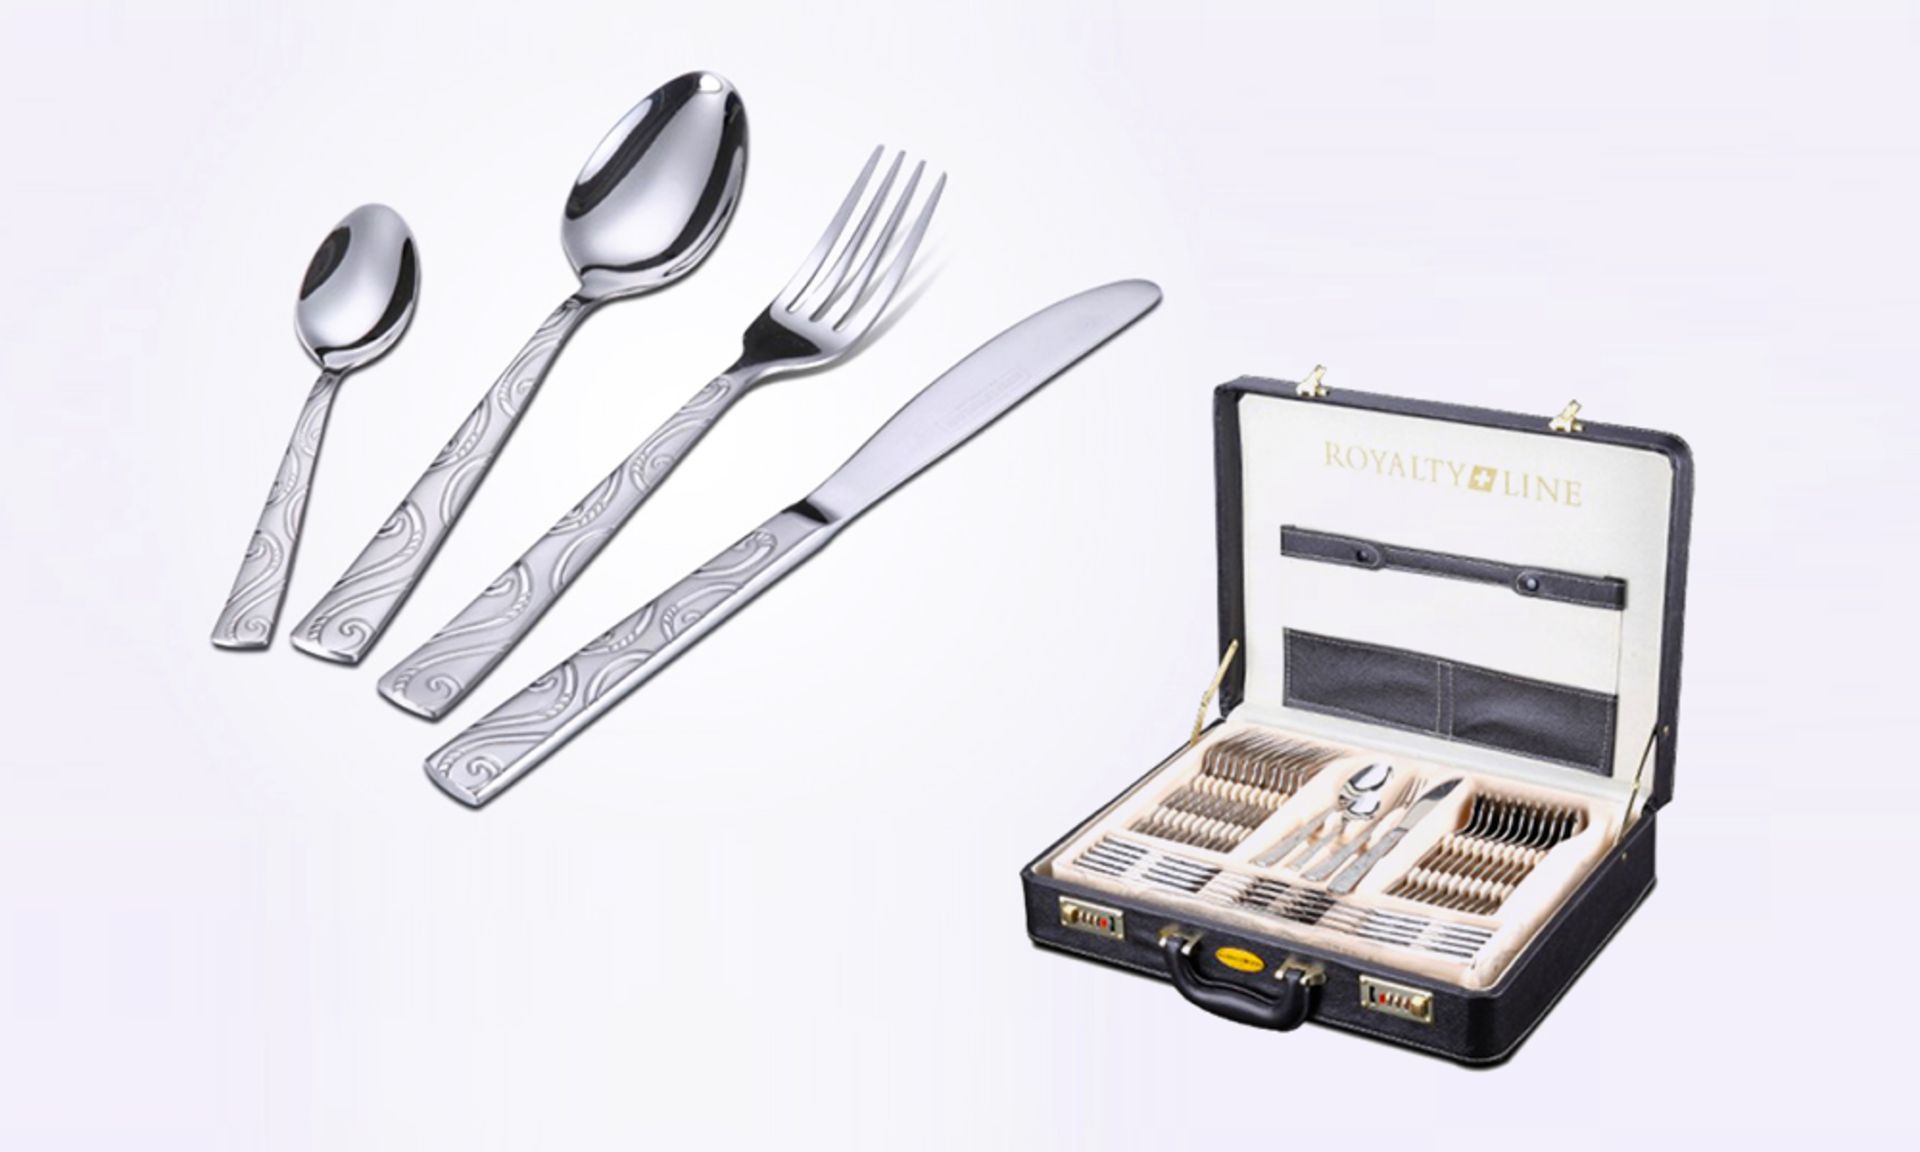 72pc Royalty Line Milan Stainless Steel + Satin Cutlery Set In Fitted Case RRP 999 Euros